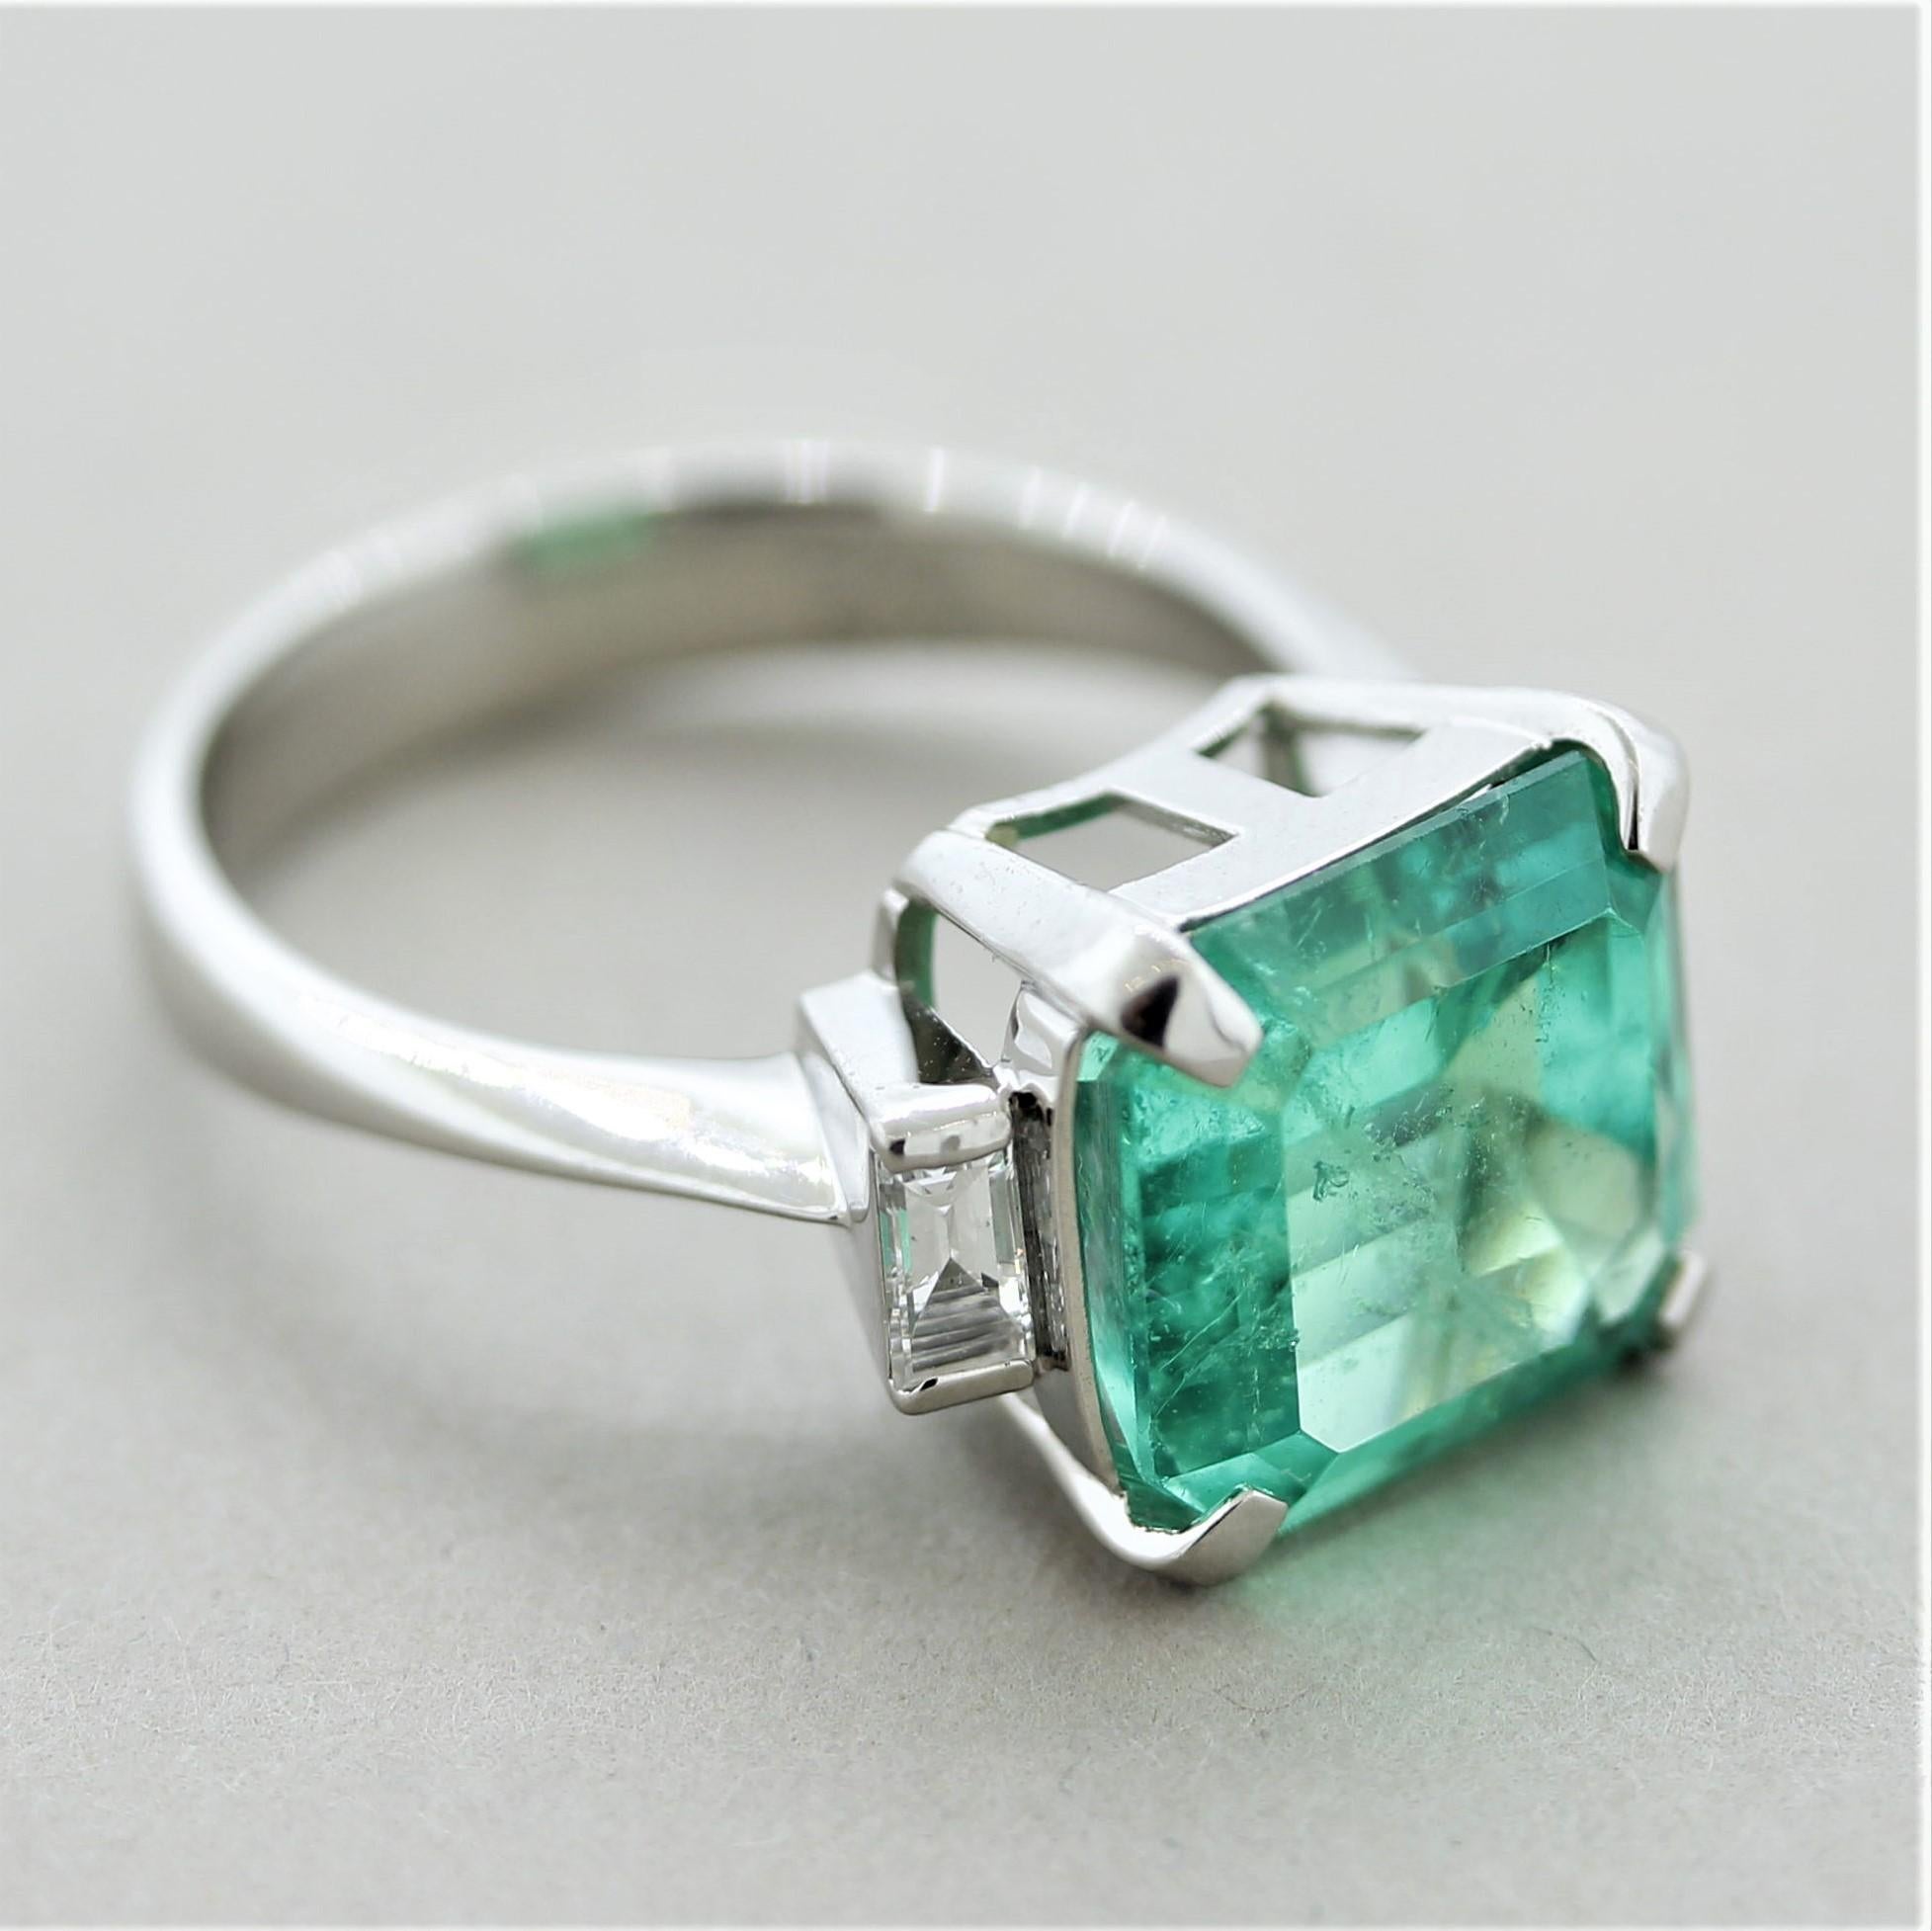 5.43 Carat Colombian Emerald Diamond Platinum Ring, GIA Certified For Sale 4